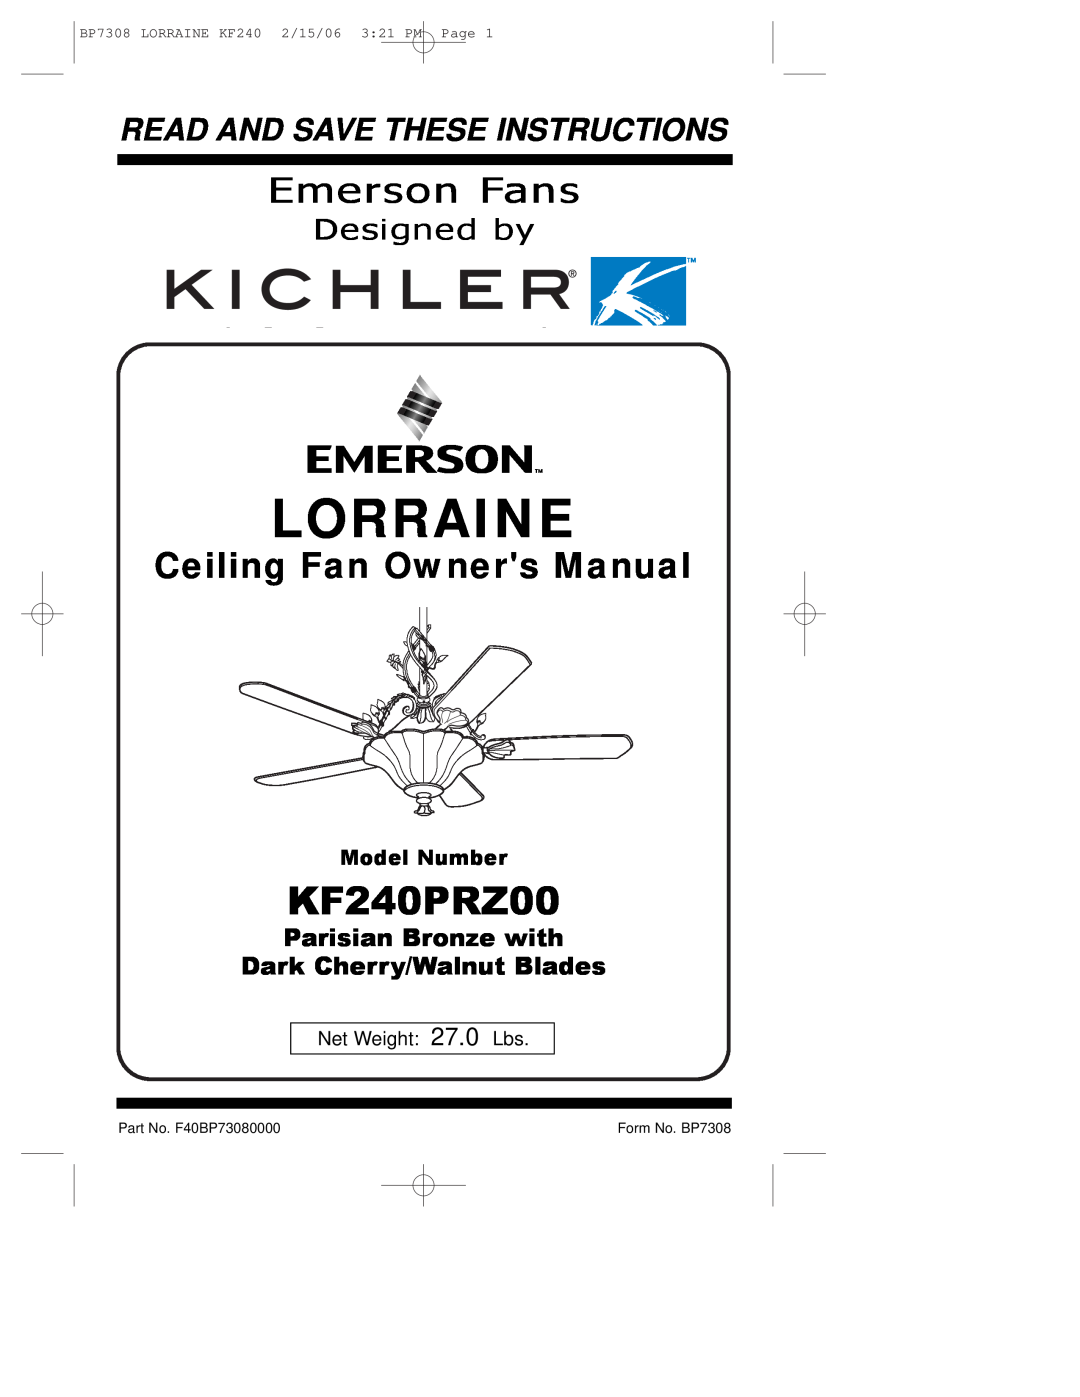 Emerson KF240PRZ00 owner manual Lorraine, Emerson Fans, Read And Save These Instructions, Designed by, Model Number 